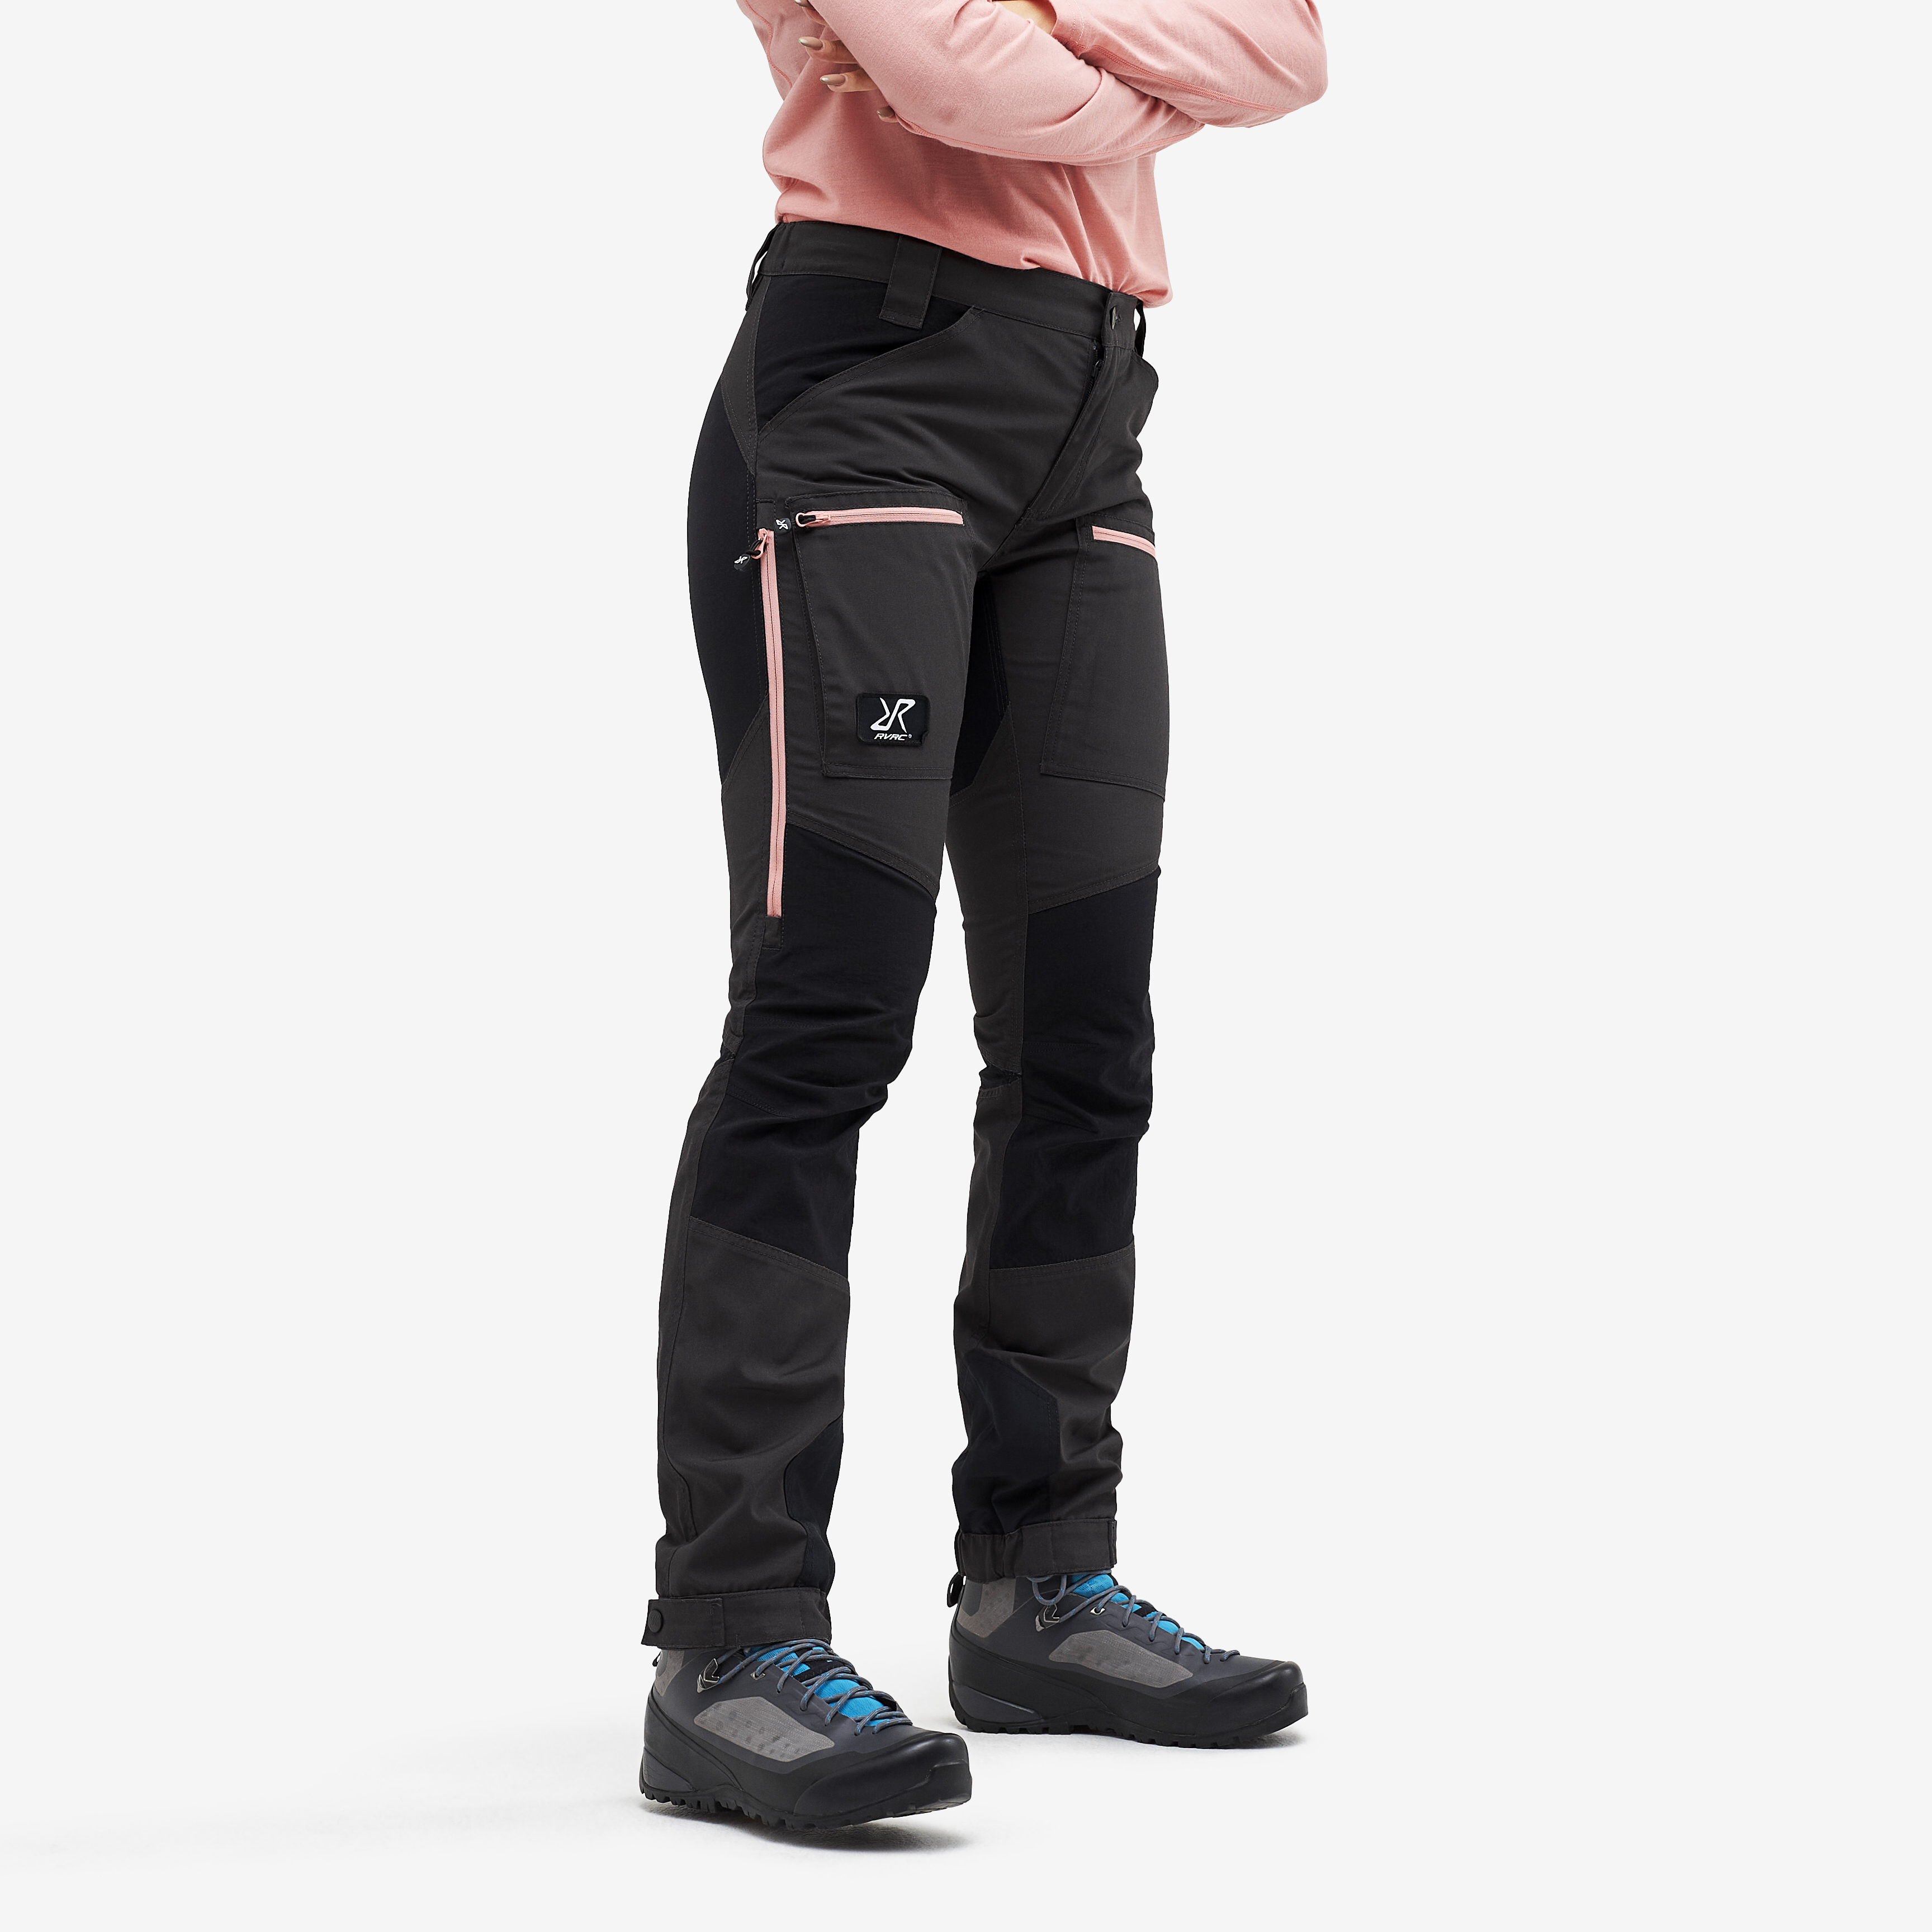 Nordwand Pro Pants Anthracite/Dusty pink Donna